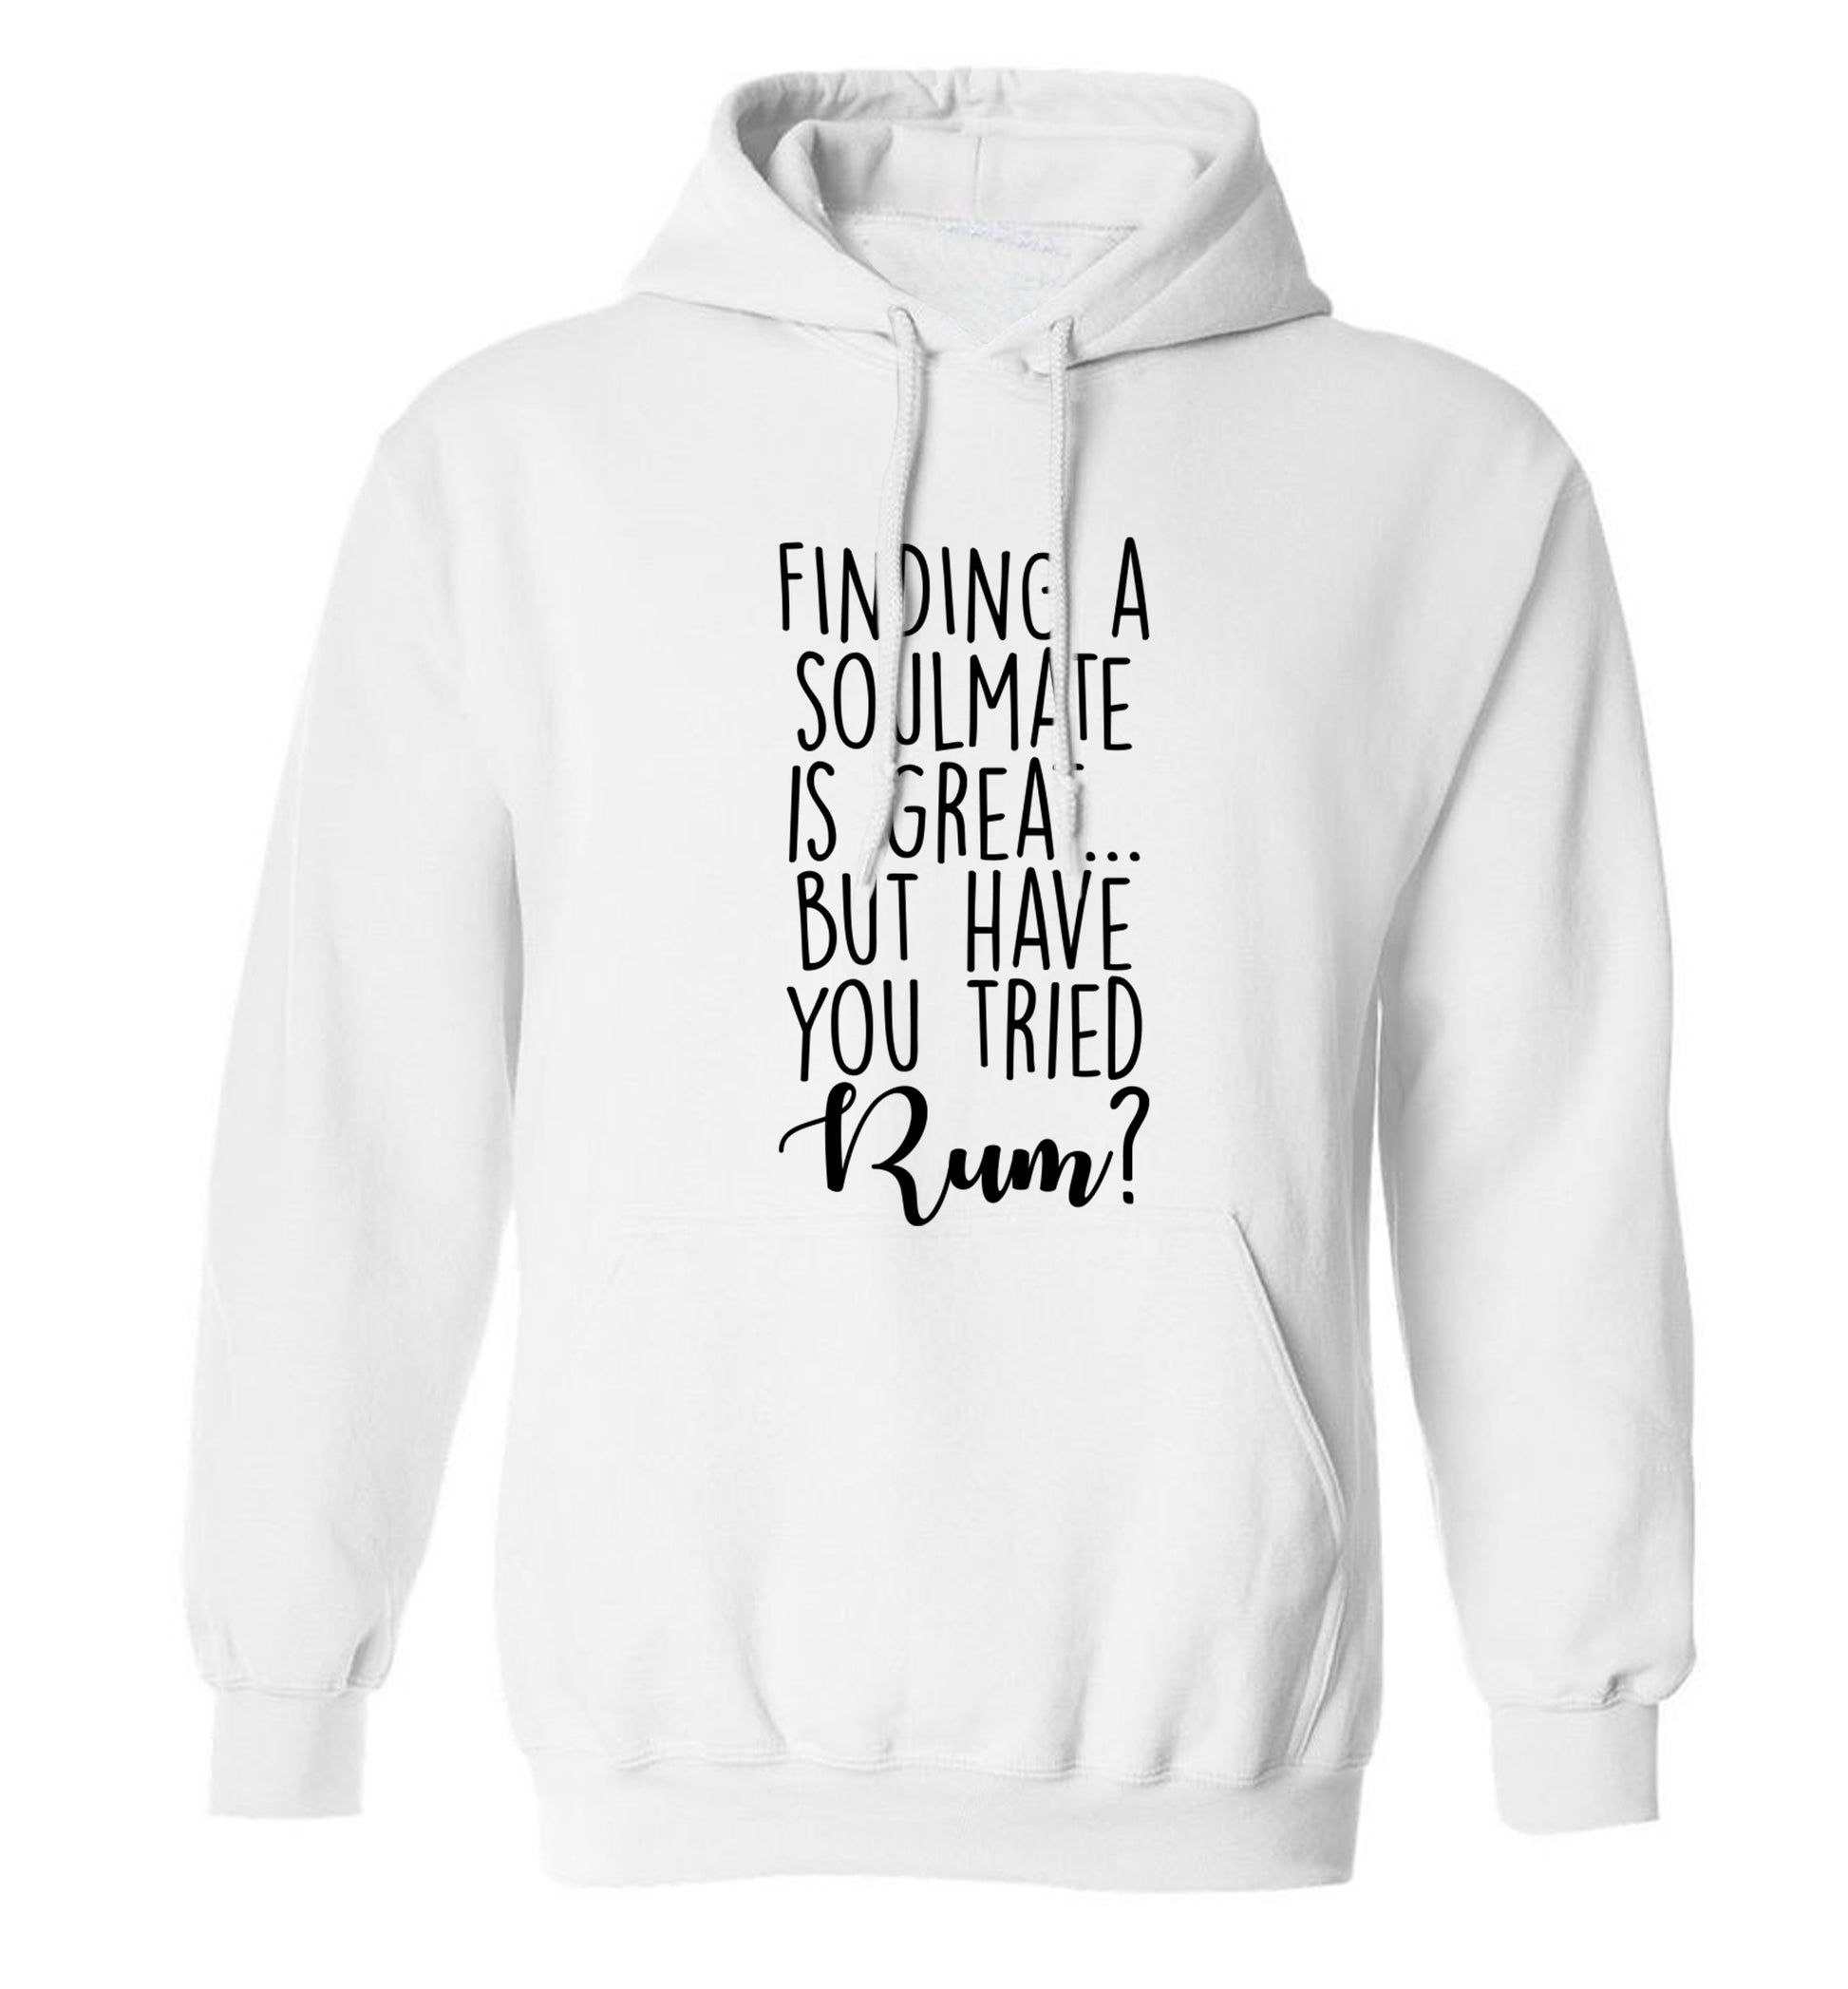 Finding a soulmate is great but have you tried rum? adults unisex white hoodie 2XL